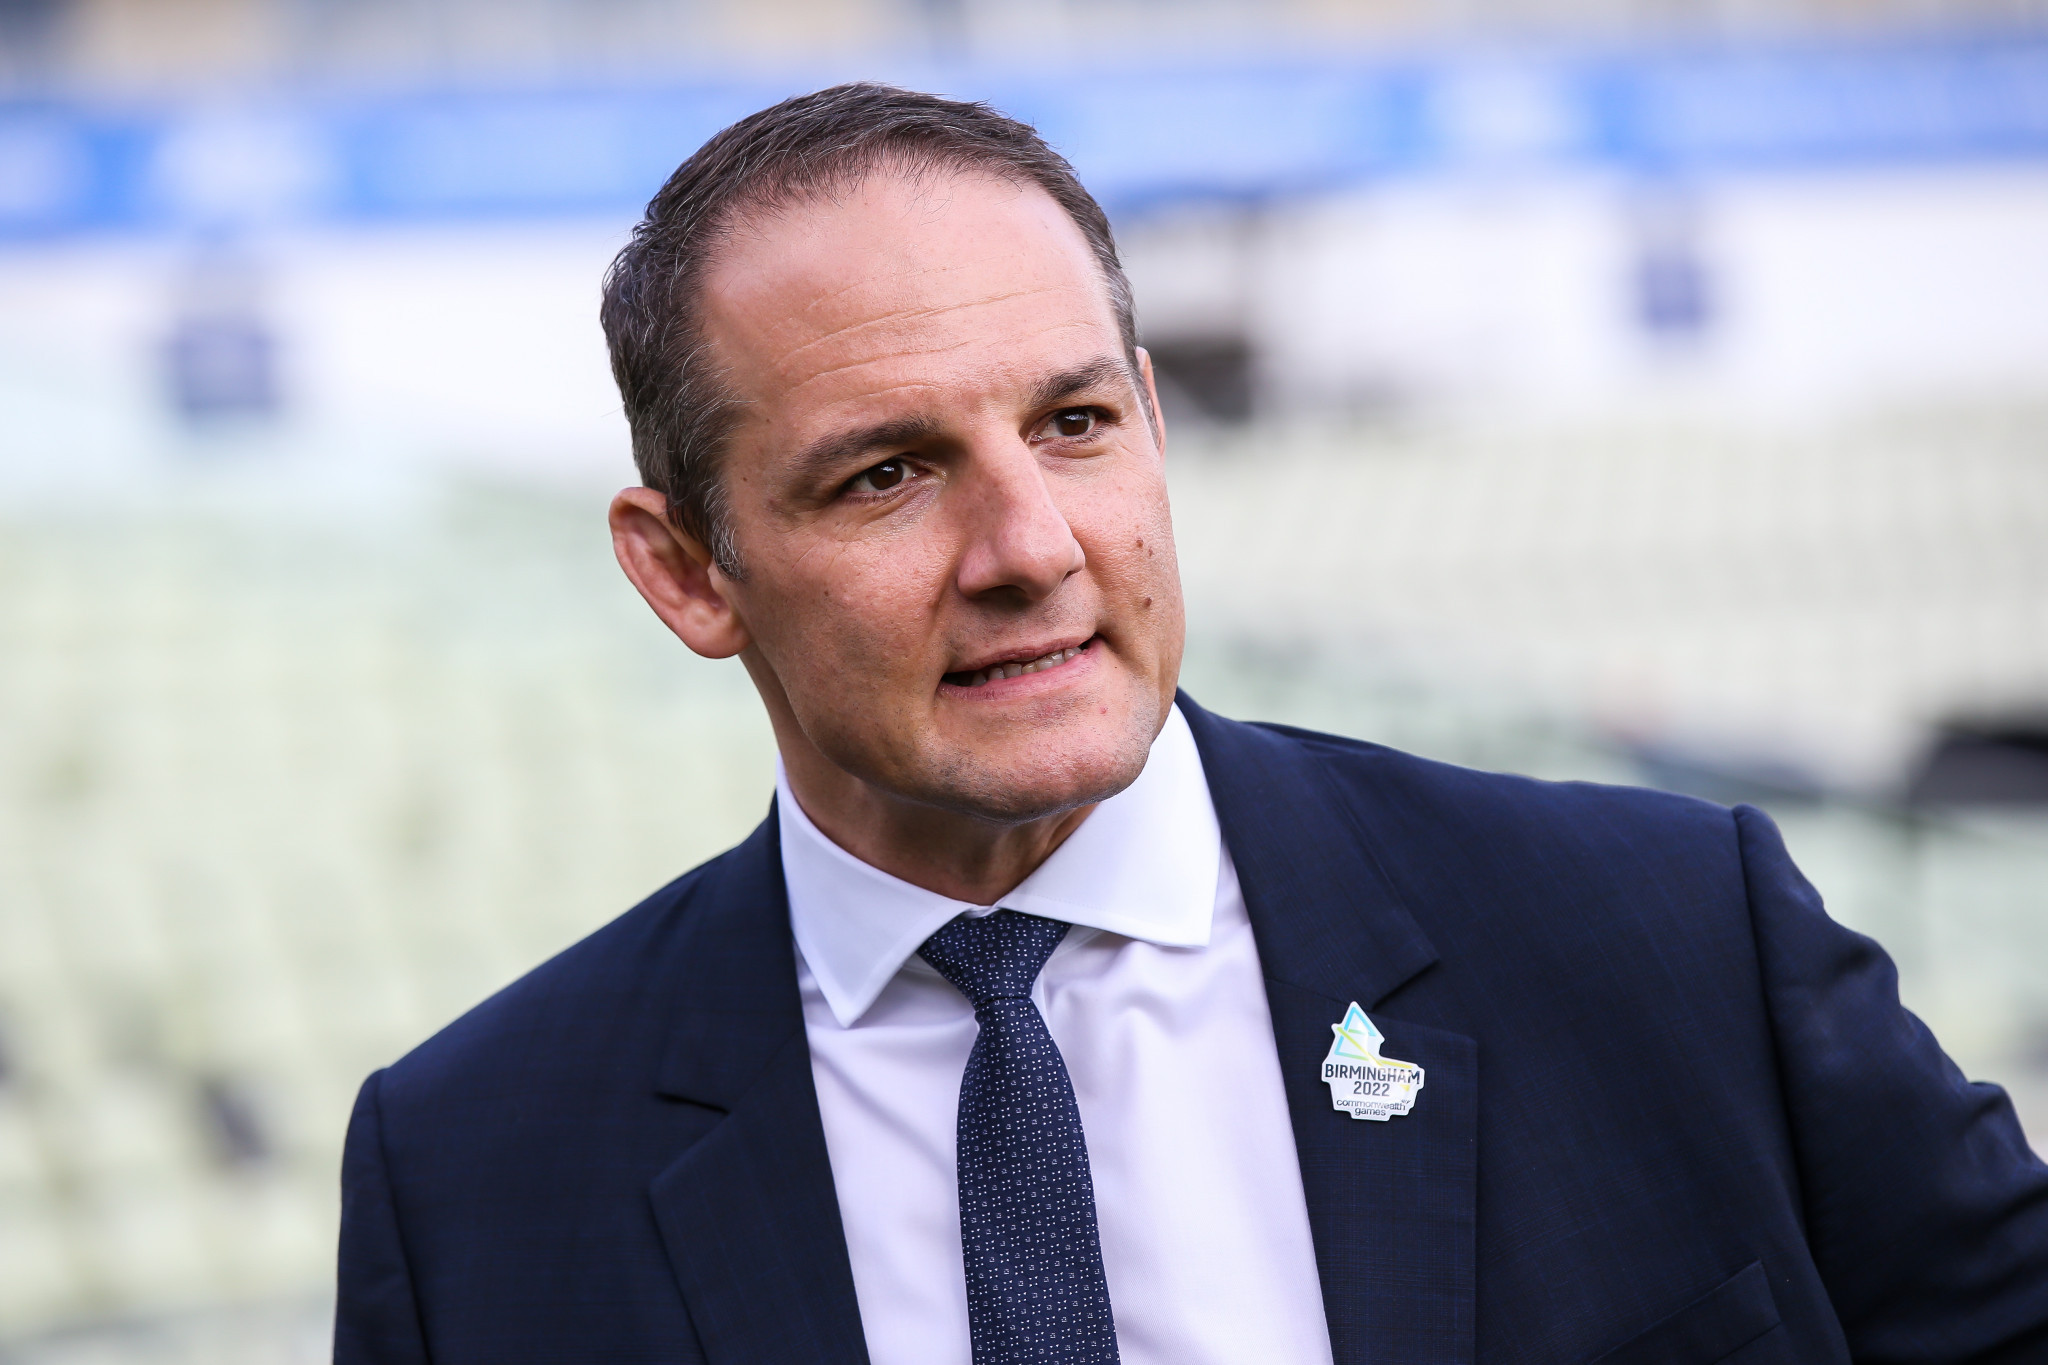 Former CGF chief executive Grevemberg joins Scottish Rugby Board